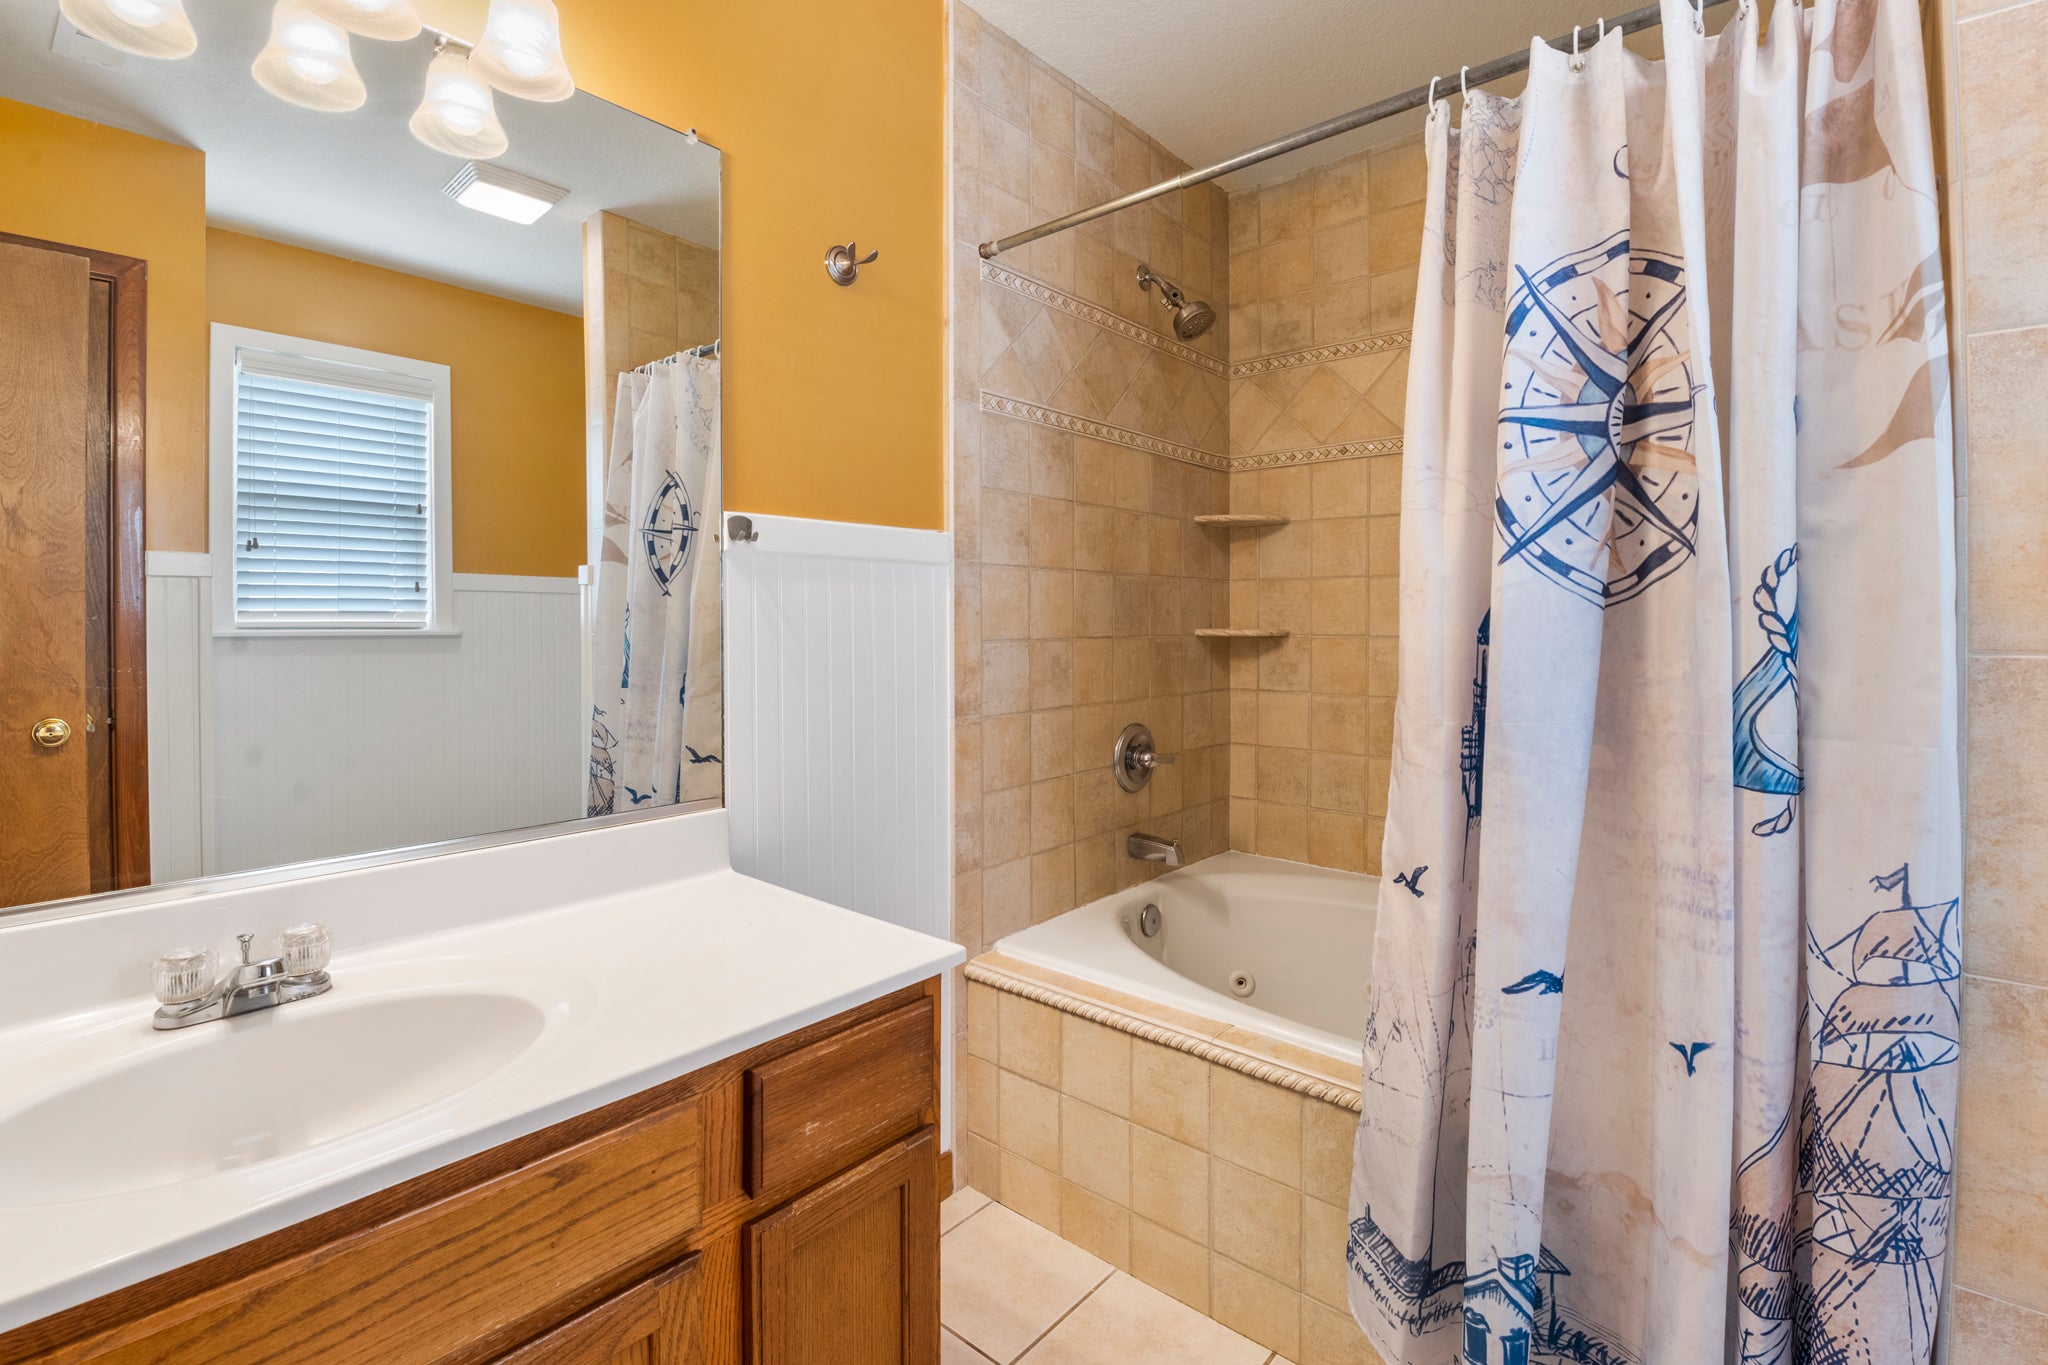 NHA12: Anchors Aweigh | Bottom Level Bedroom 1 Private Bath